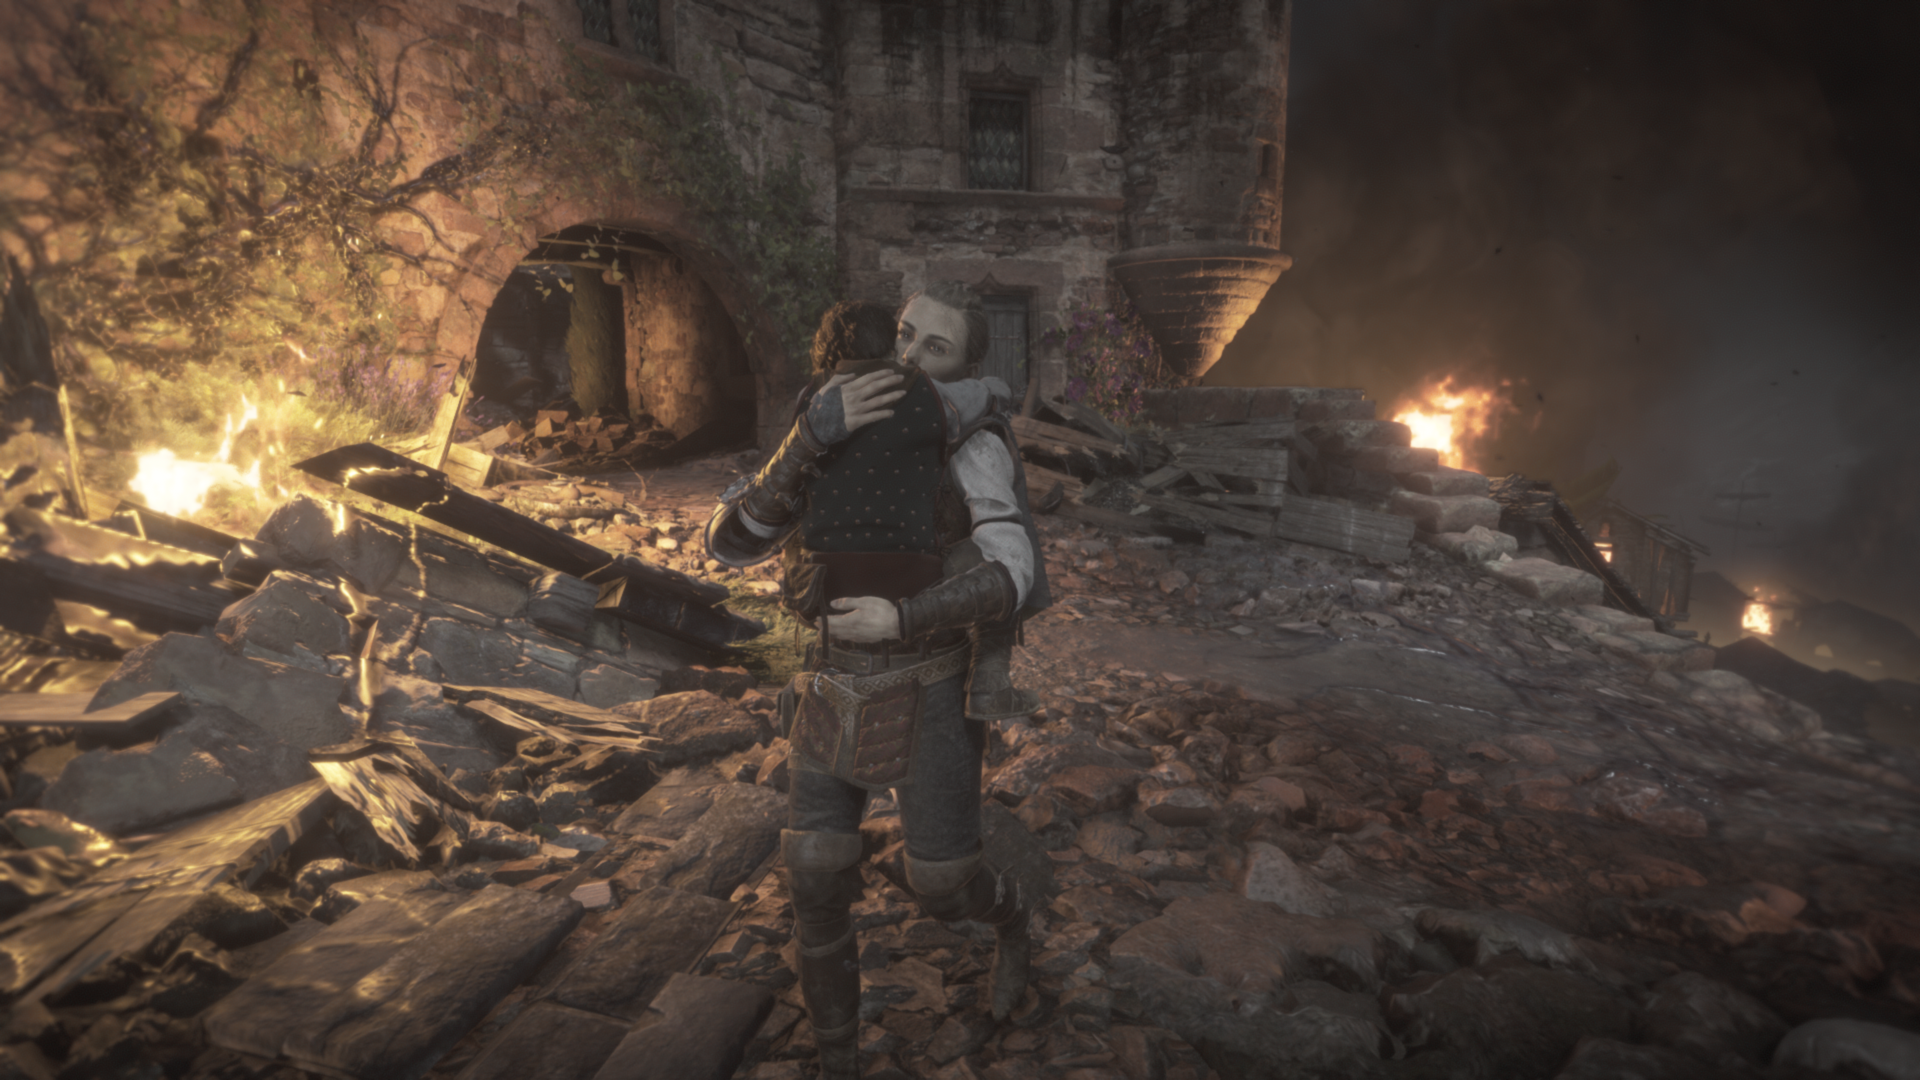 A Plague Tale: Requiem intertwines gameplay with character growth